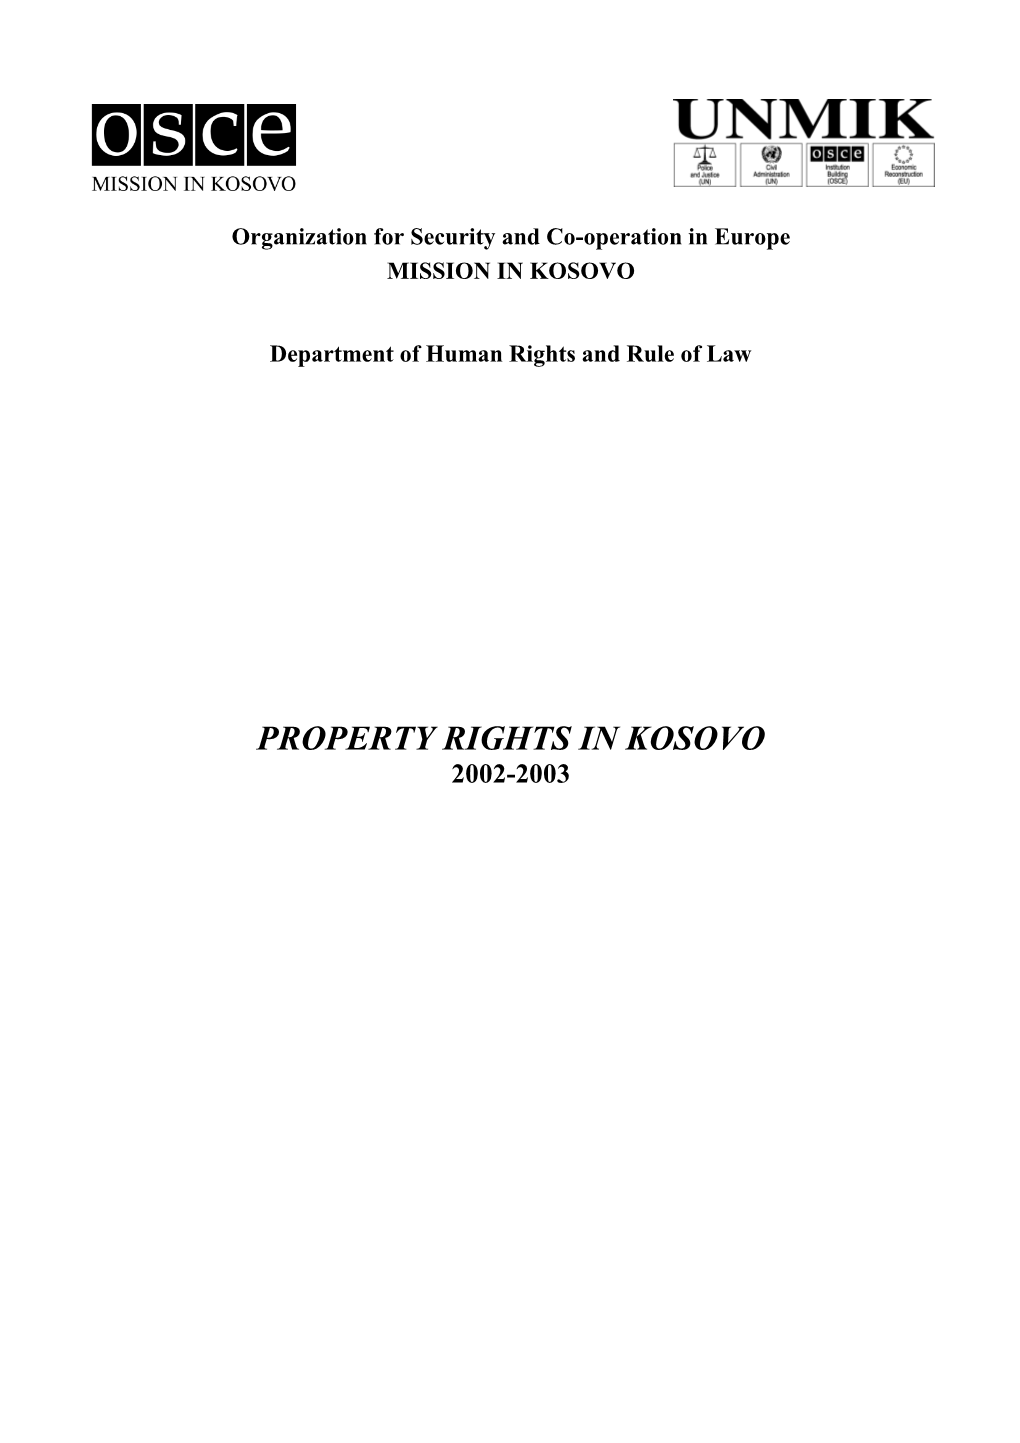 PROPERTY RIGHTS in KOSOVO 2002-2003 Table of Contents